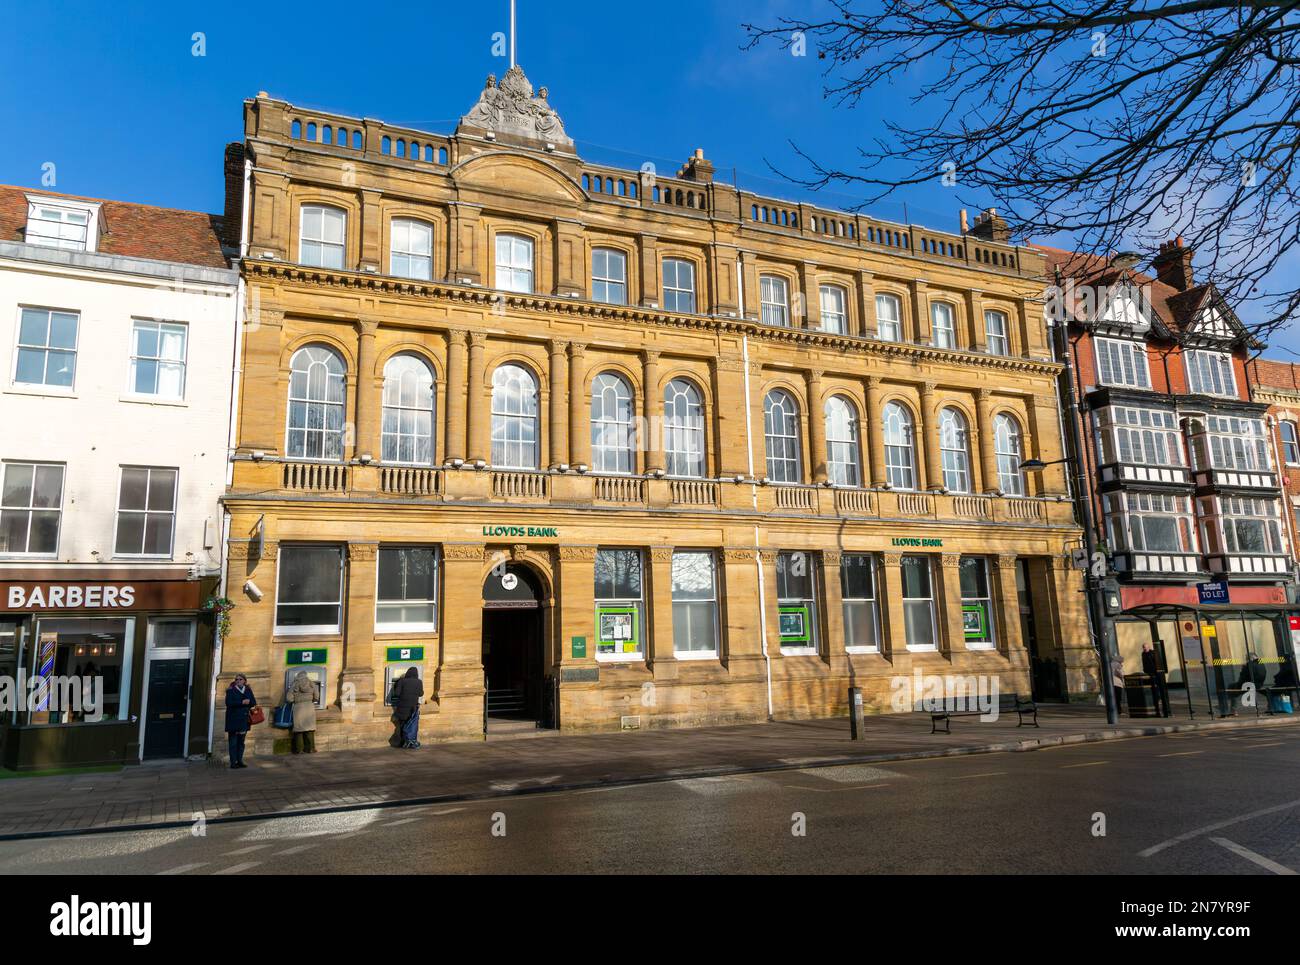 Lloyds Bank branch in historic town centre buildings, Devizes, Wiltshire, England, UK Stock Photo